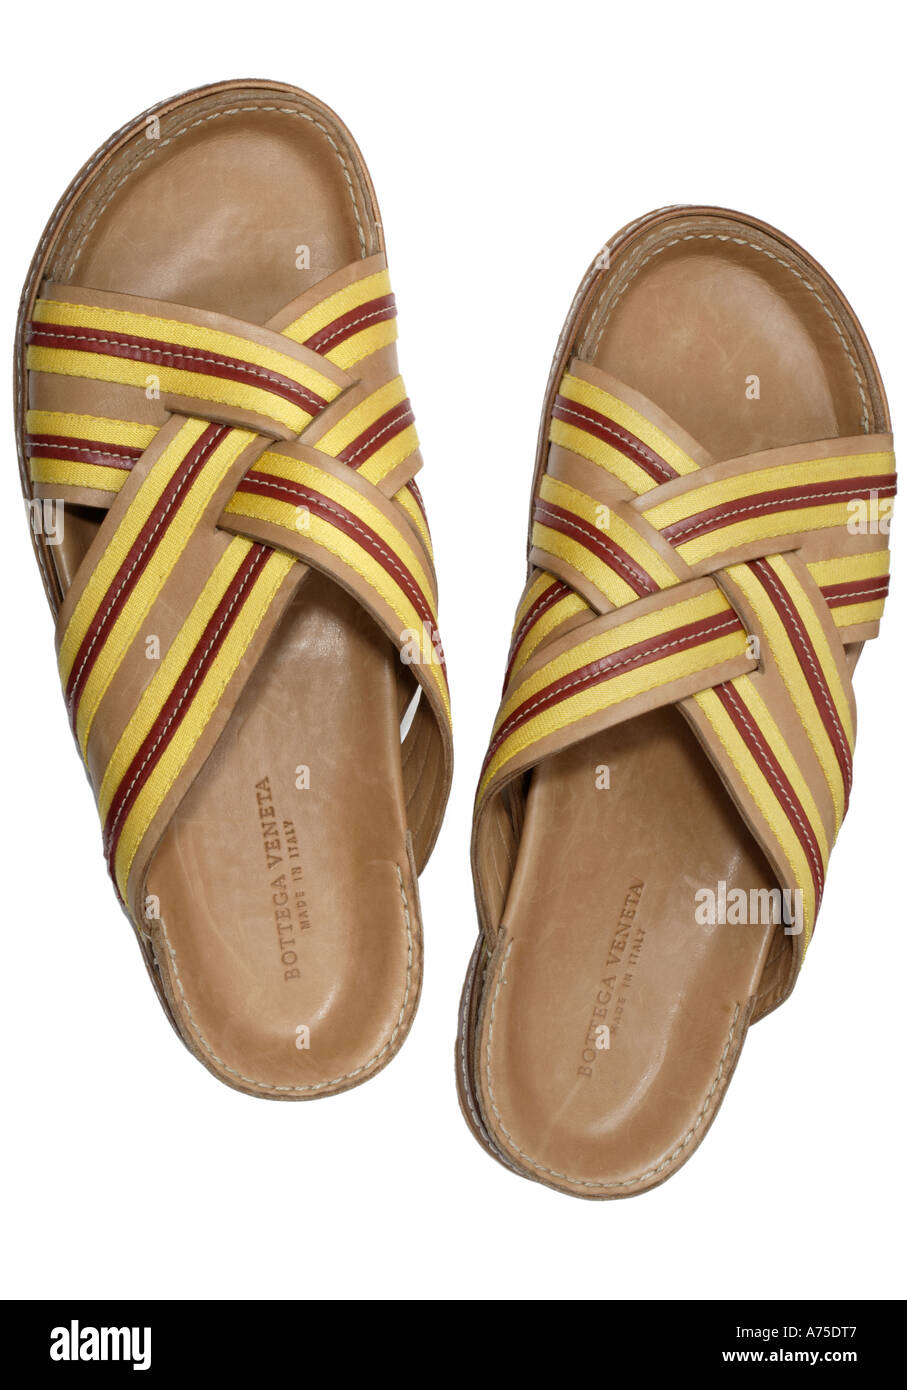 Italian Sandals High Resolution Stock Photography and Images - Alamy